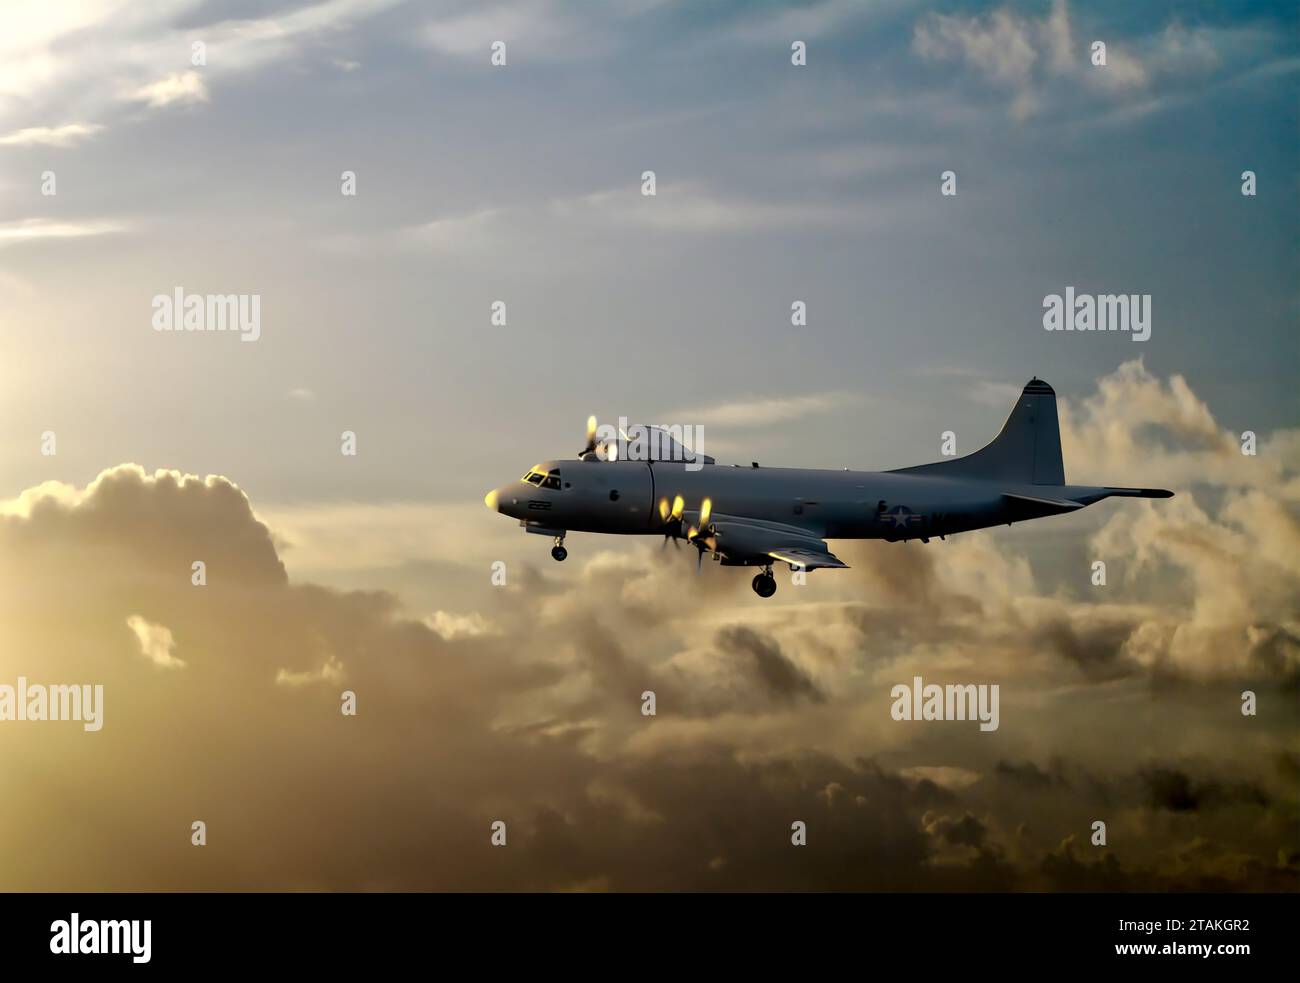 Lockheed P-3 Orion landing in Hilo Hawaii at sunset Stock Photo